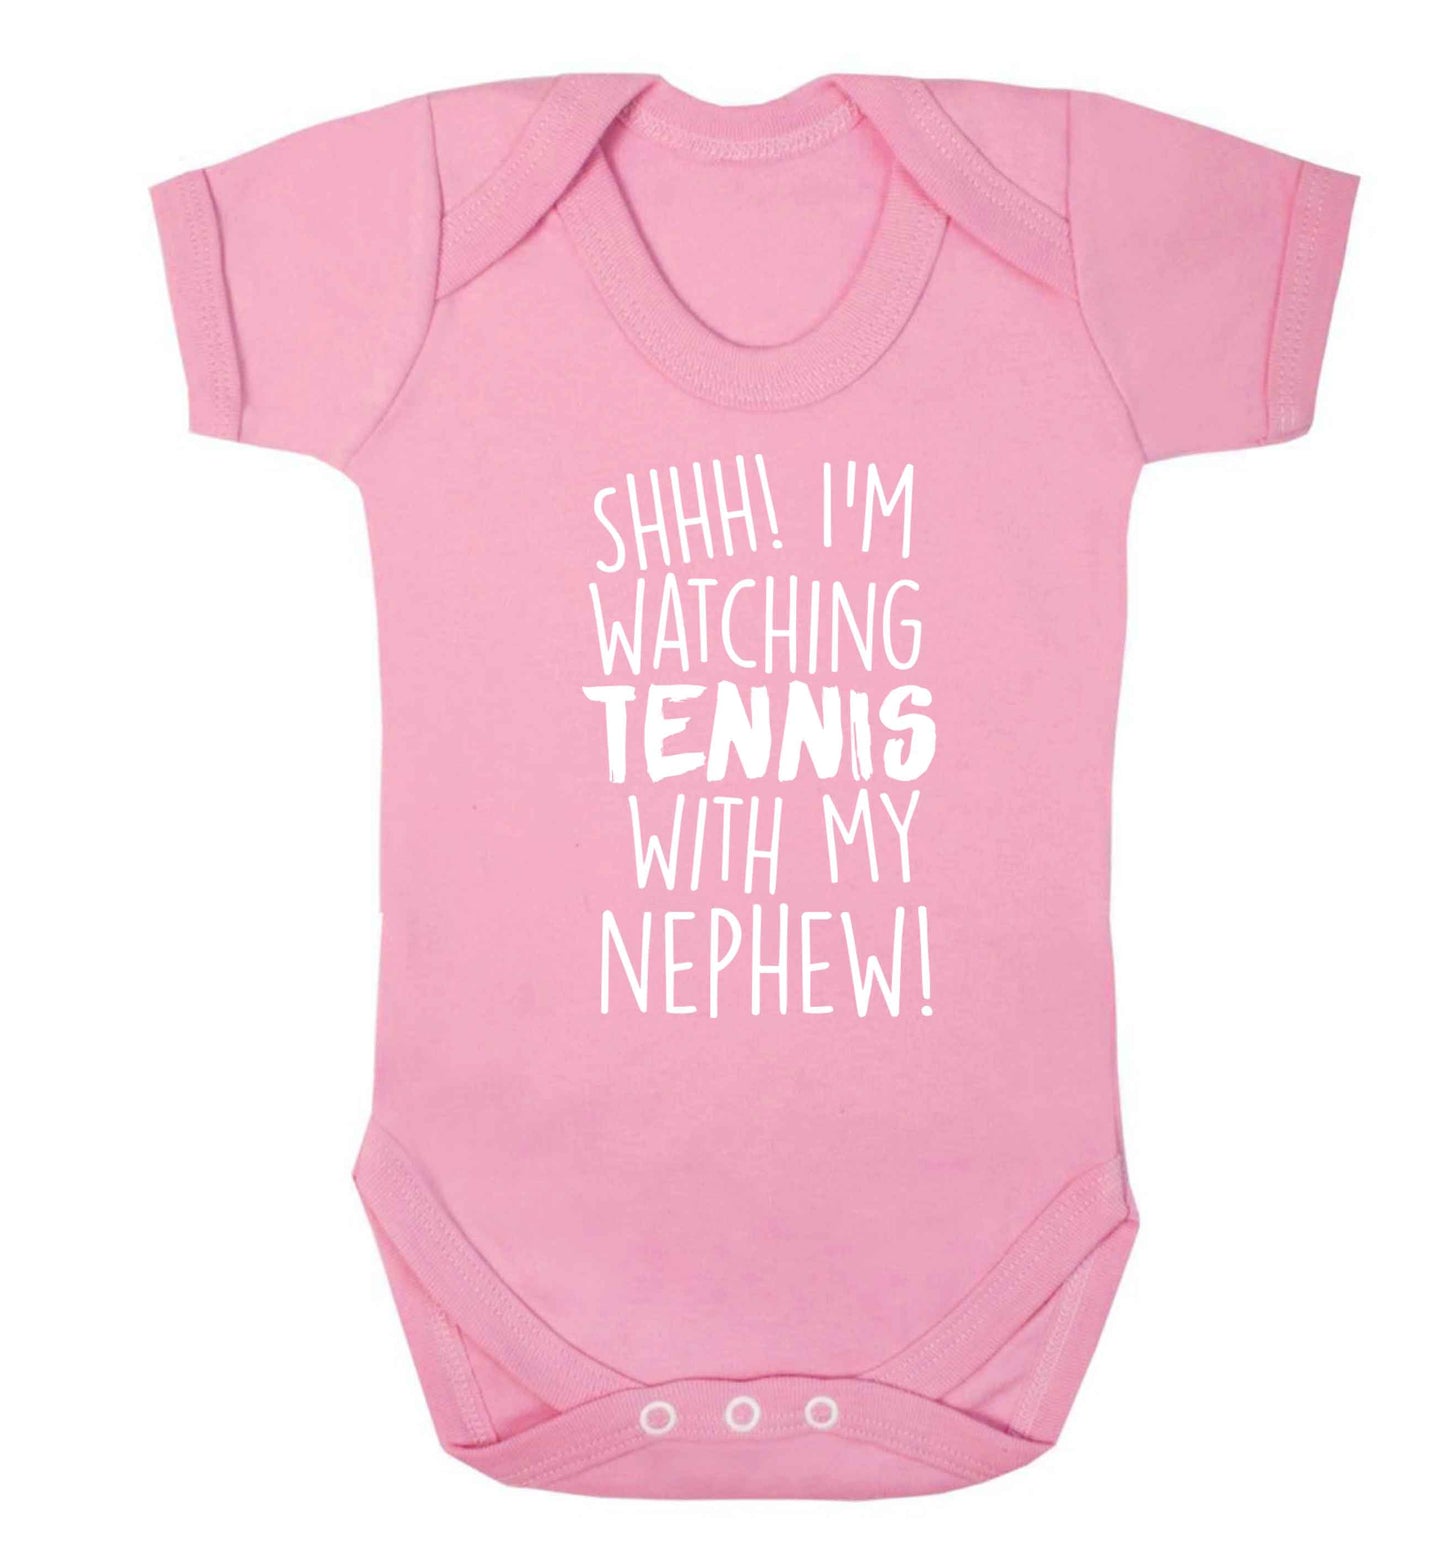 Shh! I'm watching tennis with my nephew! Baby Vest pale pink 18-24 months